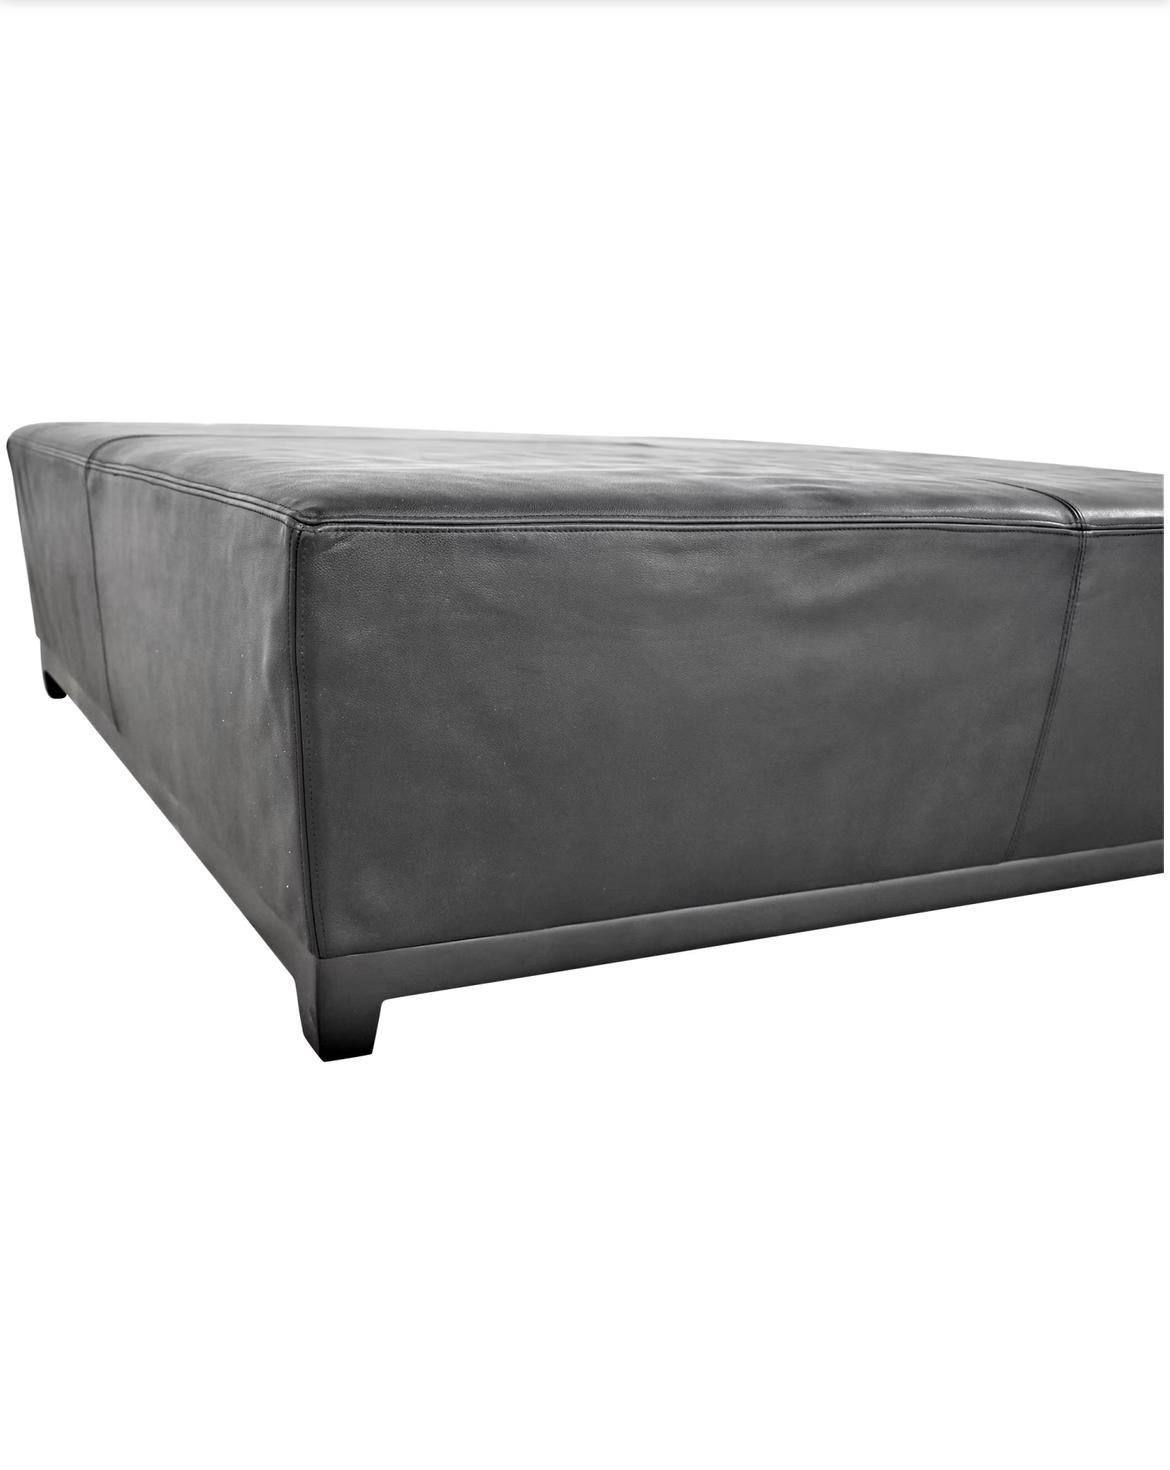 American Christian Liaigre for Holly Hunt Square Leather Ottoman For Sale